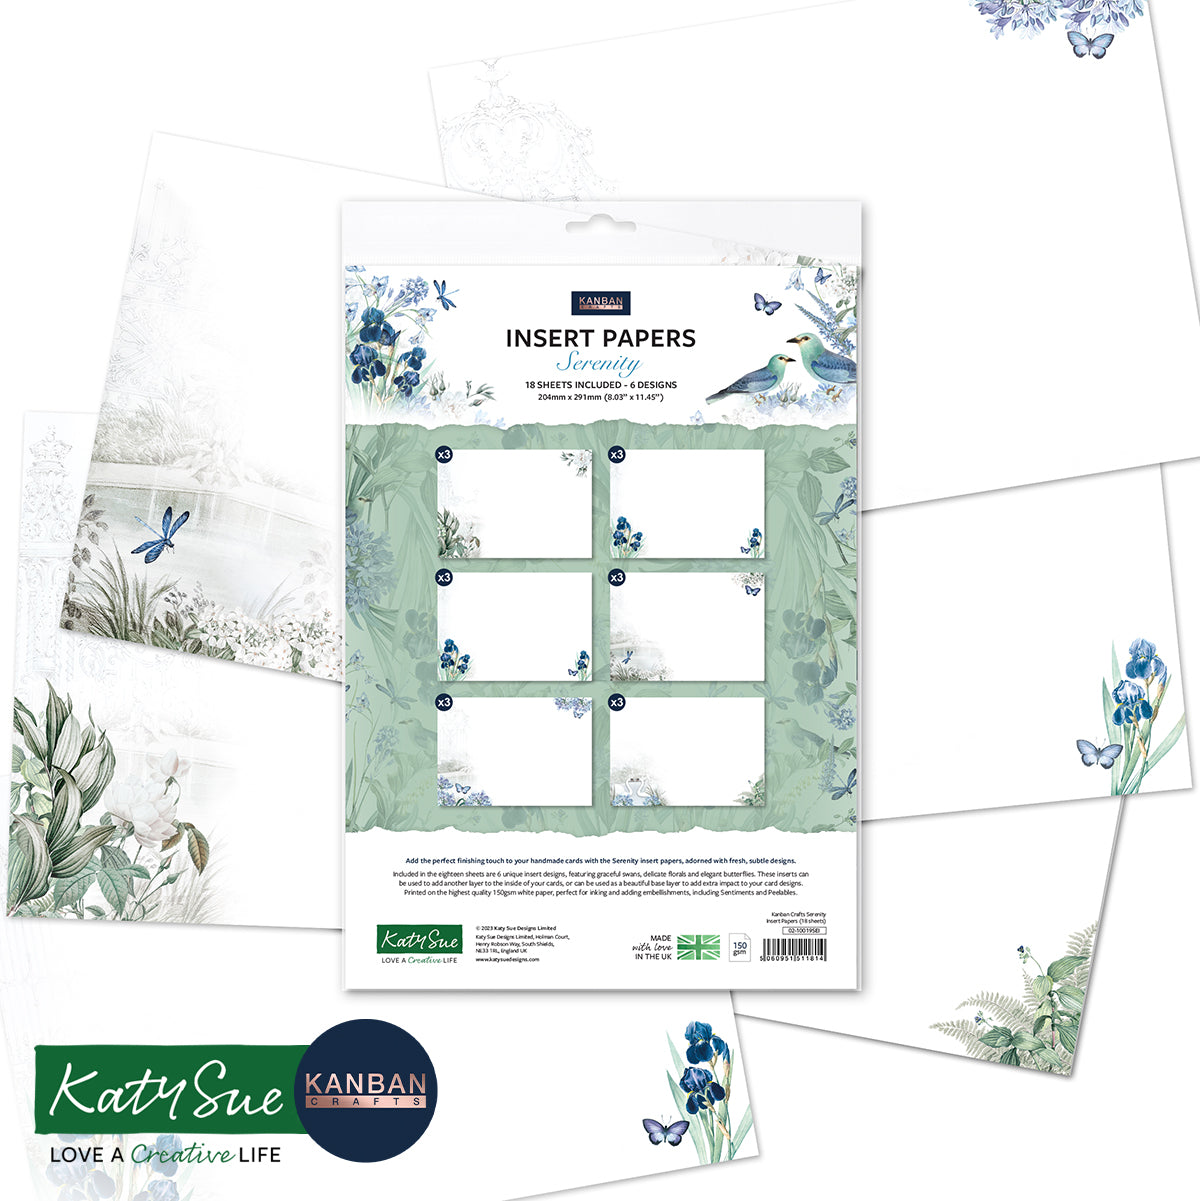 Kanban Crafts Serenity Insert Papers, 18 sheets